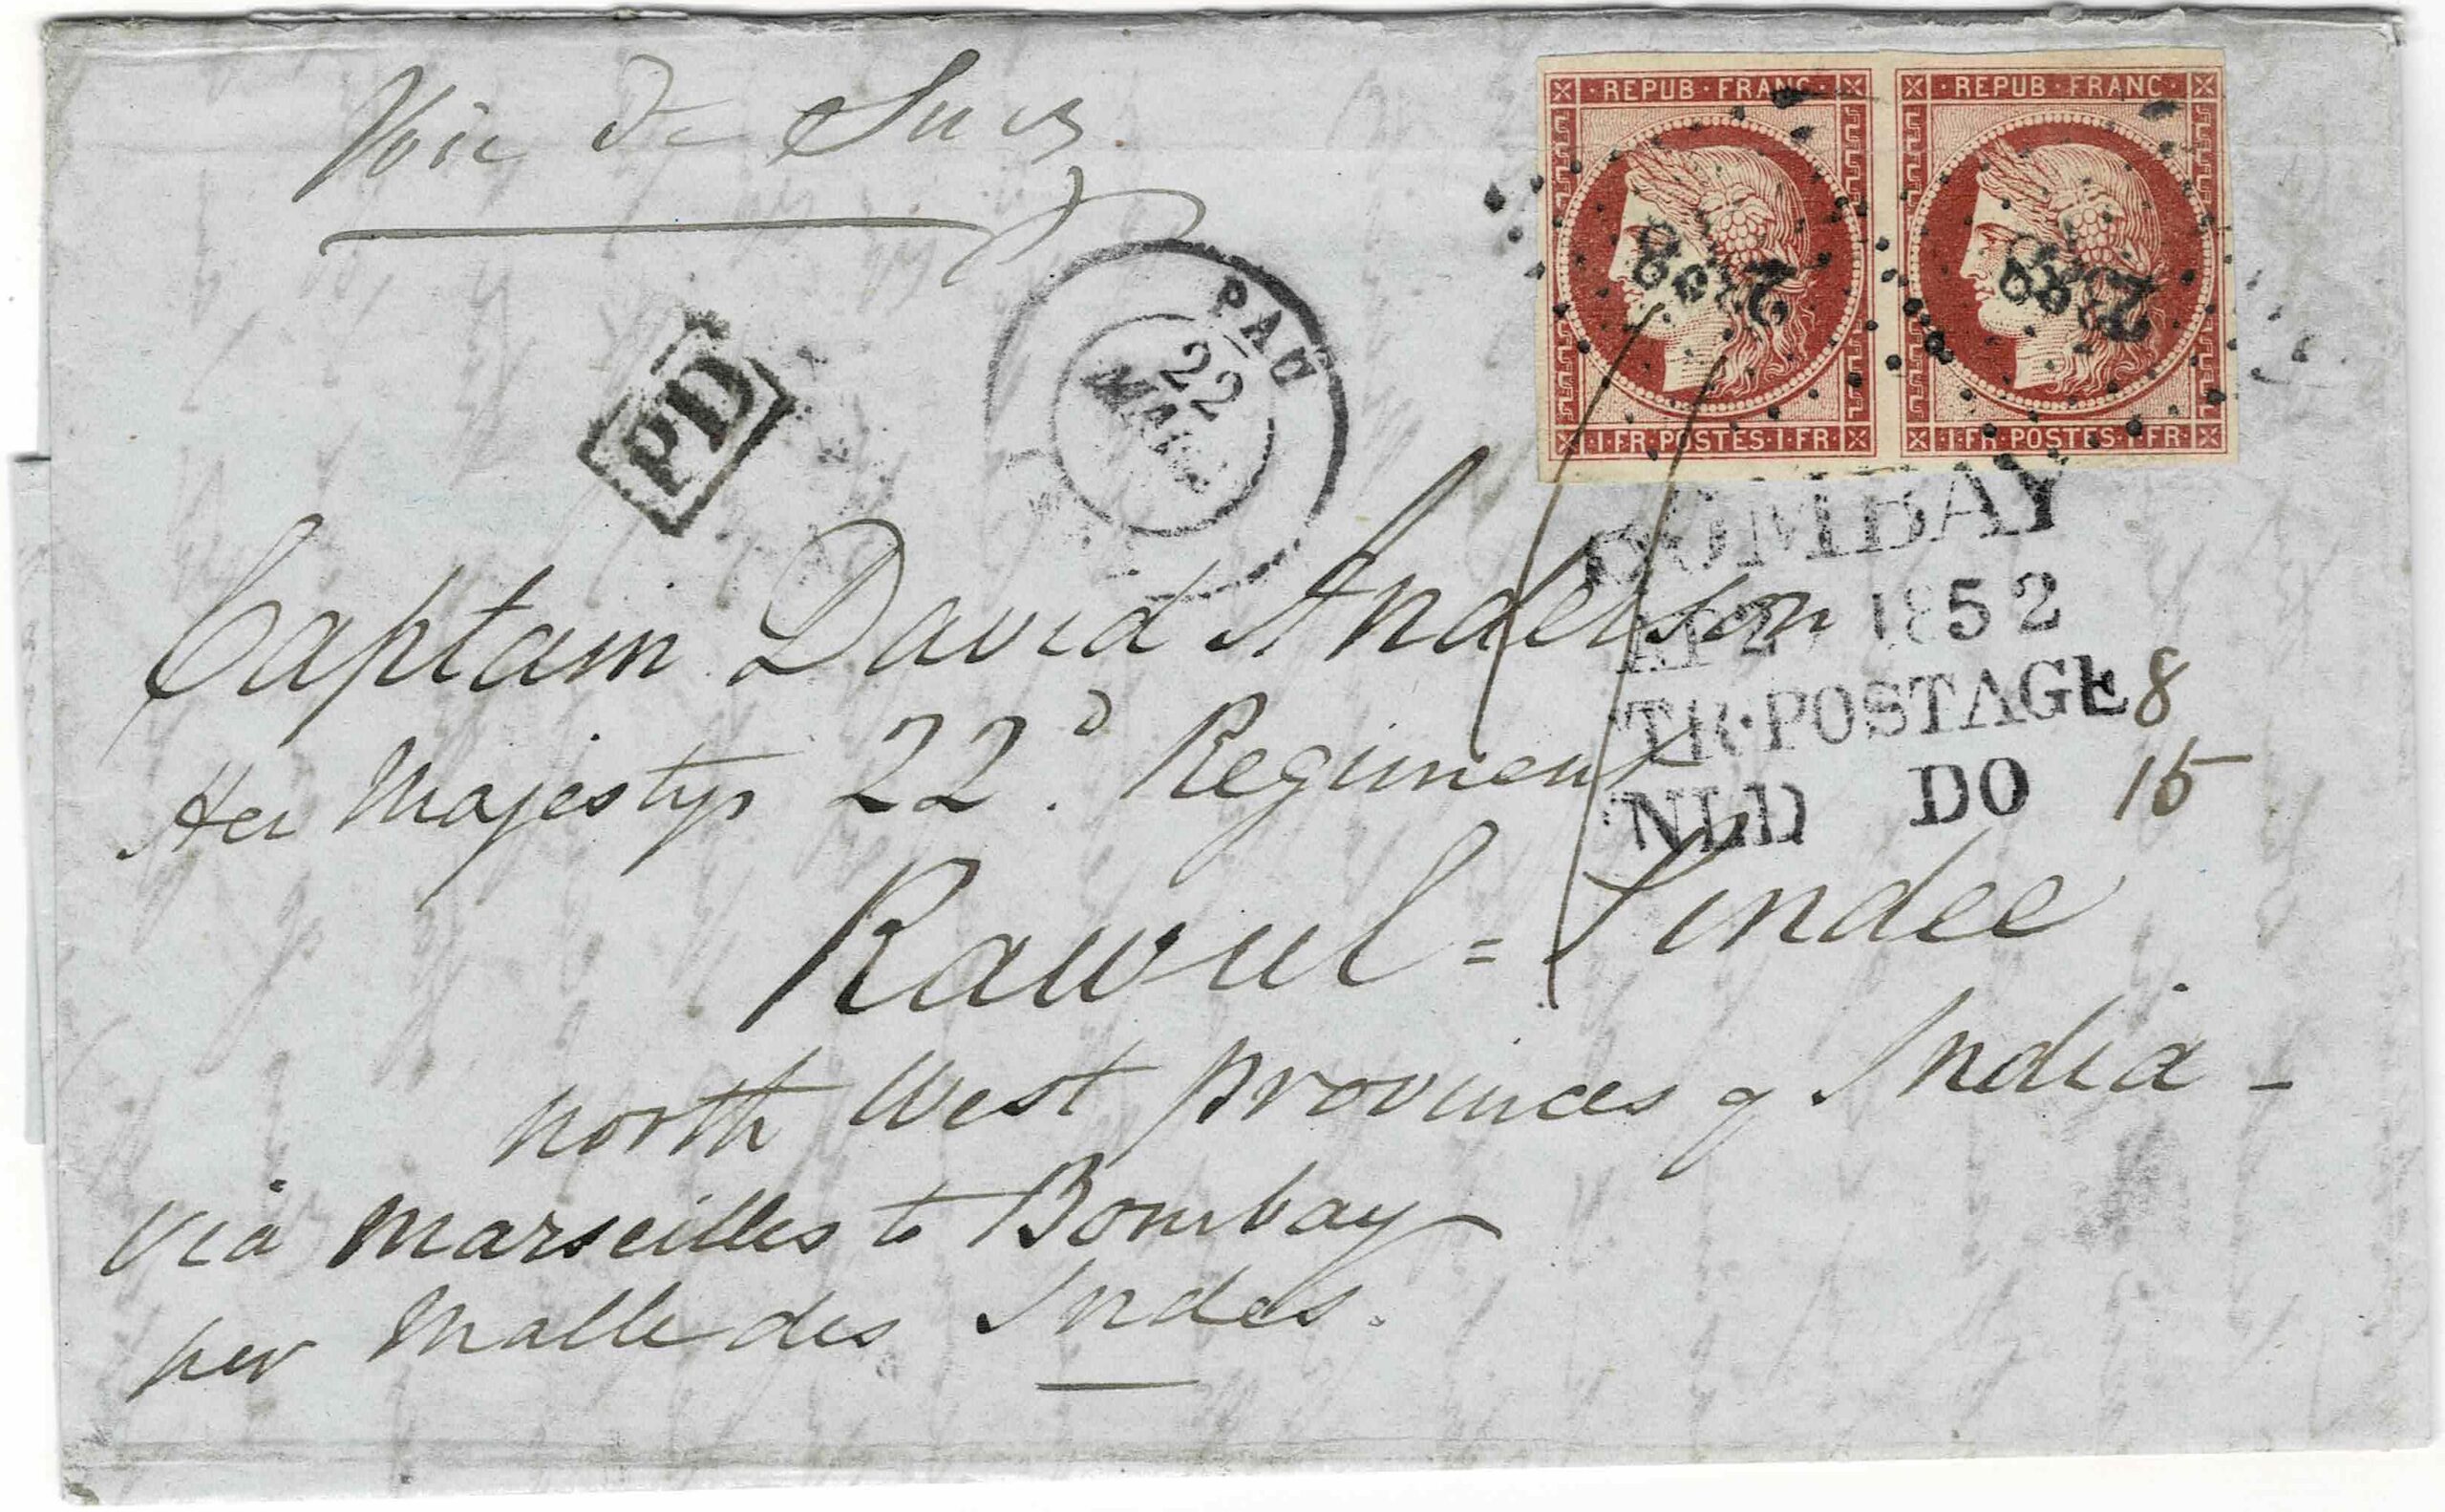 Entire letter (datelined 22 March 1852) from Pau, France to Rawul Pindee, Punjab